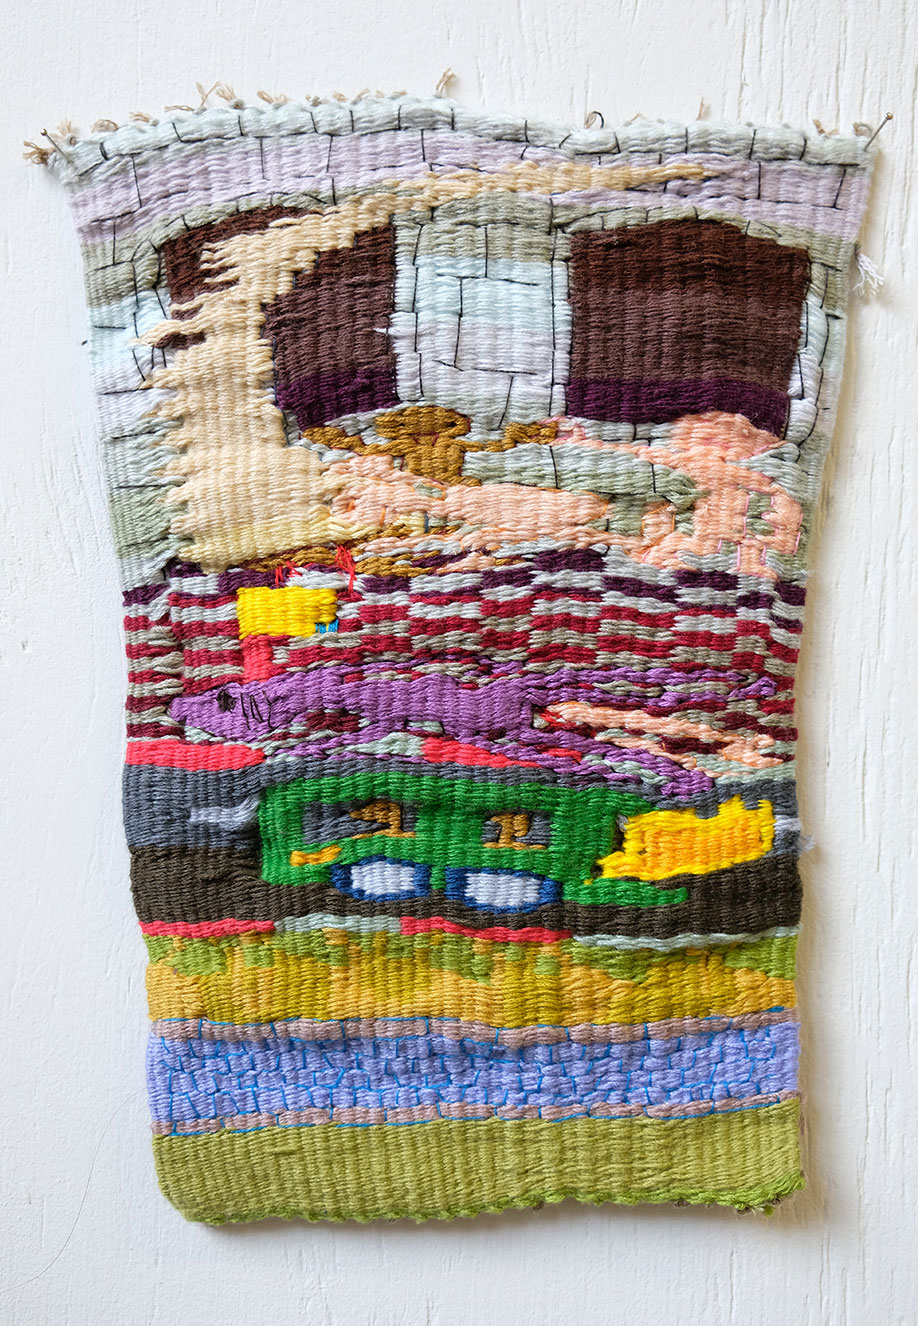 <b>Title: </b>Shir Cohen<br>All of the Penis in August<br /><b>Year: </b>2020<br /><b>Medium: </b>Cotton weave<br /><b>Size: </b>26 x 20cm (approx)